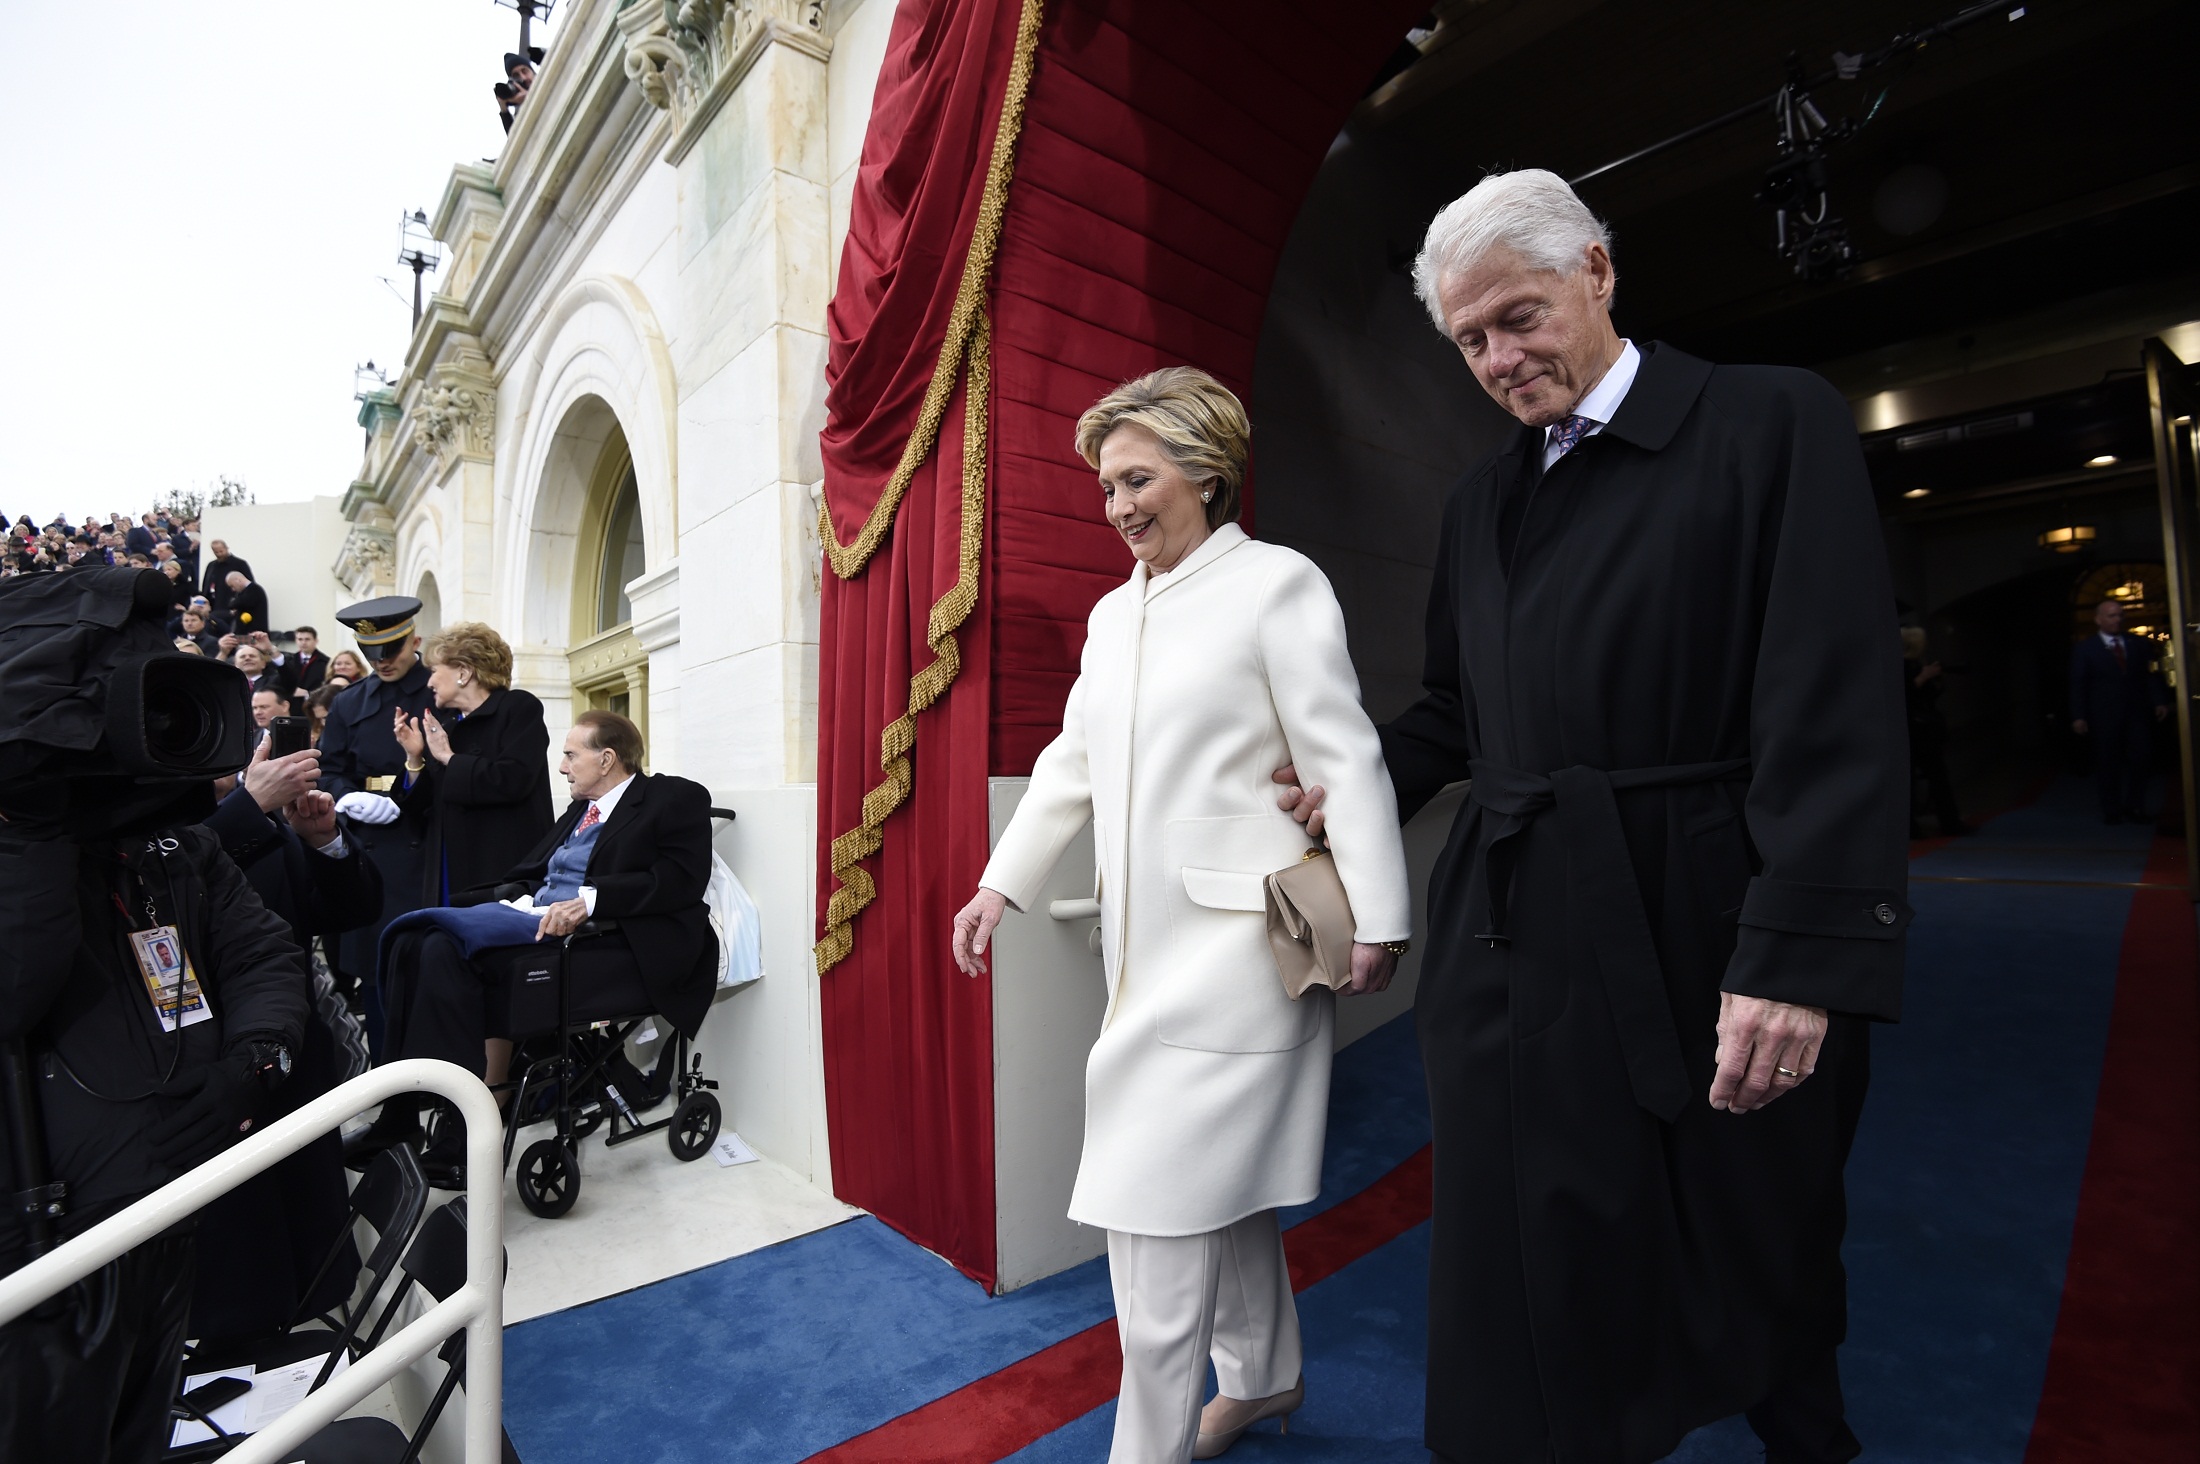 Former US President Bill Clinton and First Lady Hillary Clinton arrive for the Presidential Inauguration of Donald Trump at the US Capitol in Washington, DC, January 20, 2017. / AFP PHOTO / POOL / SAUL LOEB